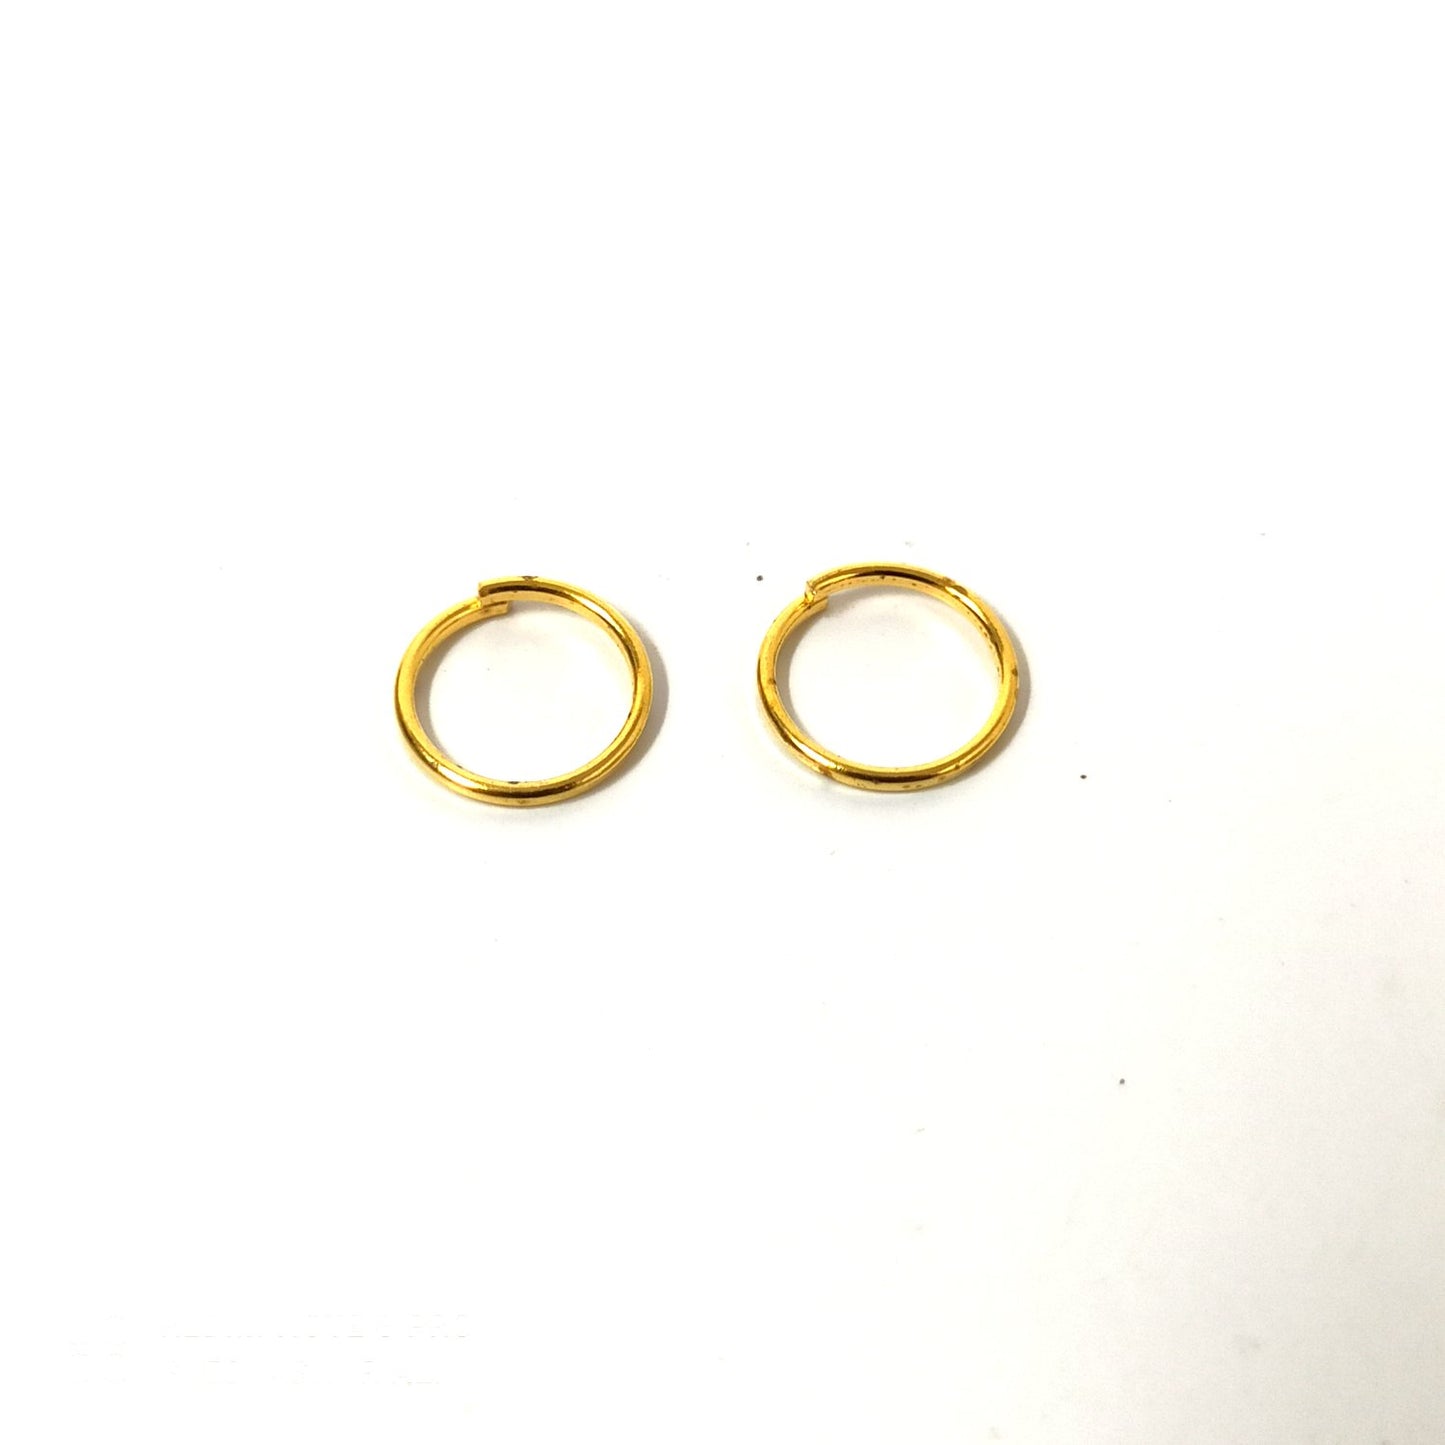 6mm Golden Jump Rings for Making Earrings and Jewellery (100 Pcs) - 96-34